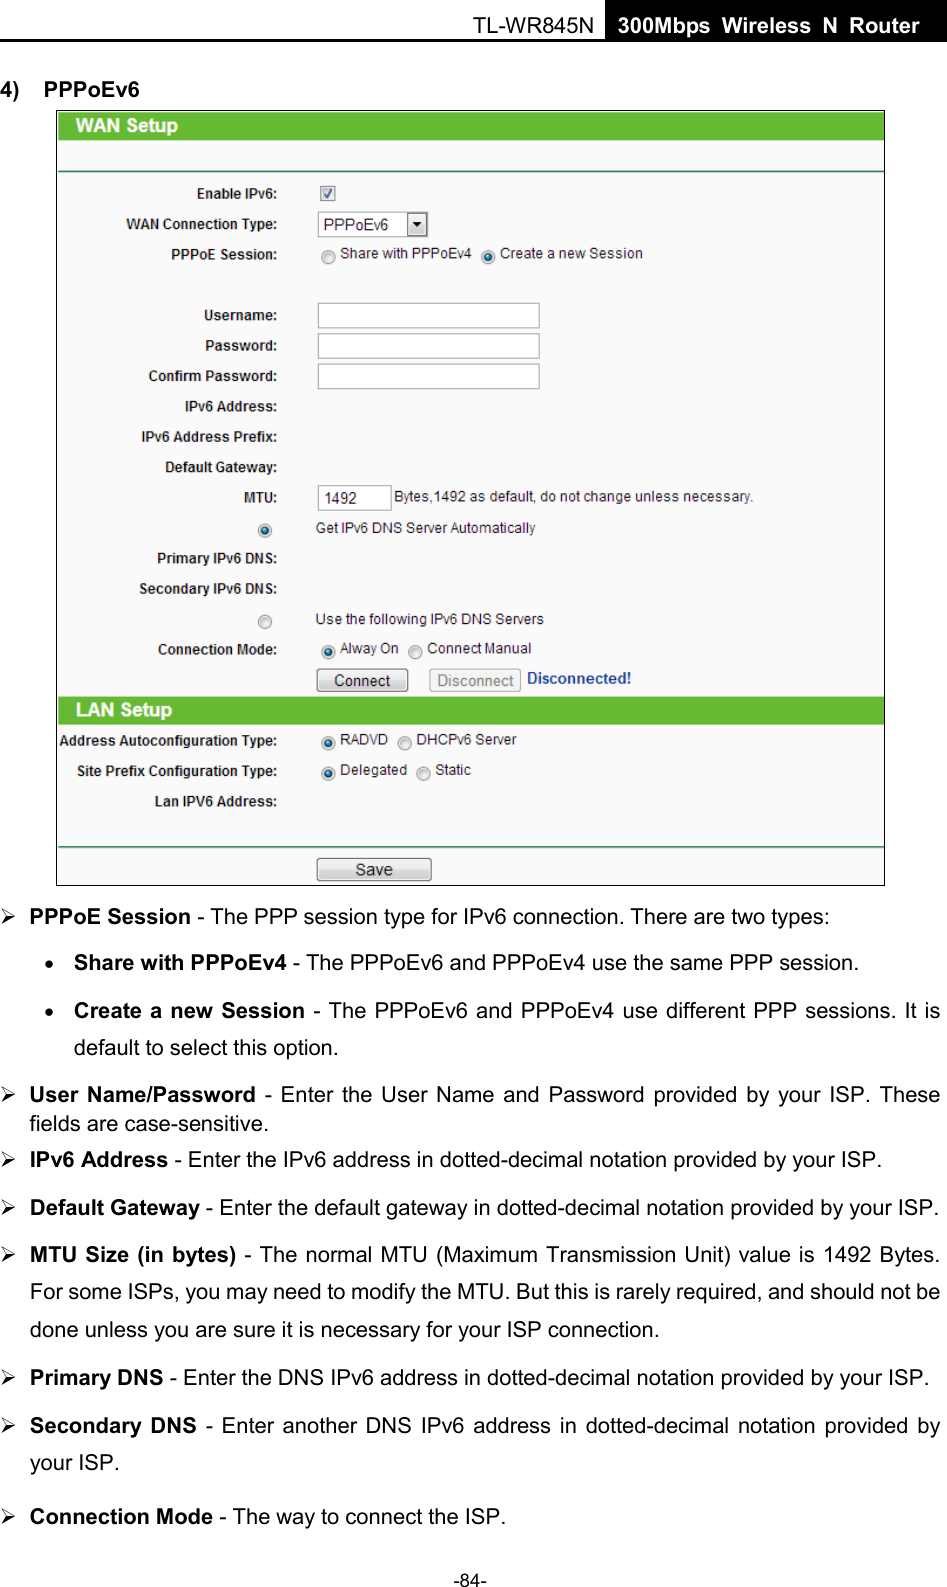  TL-WR845N  300Mbps Wireless N Router    4) PPPoEv6   PPPoE Session - The PPP session type for IPv6 connection. There are two types: • Share with PPPoEv4 - The PPPoEv6 and PPPoEv4 use the same PPP session. • Create a new Session - The PPPoEv6 and PPPoEv4 use different PPP sessions. It is default to select this option.  User Name/Password  - Enter the User Name and Password provided by your ISP. These fields are case-sensitive.  IPv6 Address - Enter the IPv6 address in dotted-decimal notation provided by your ISP.  Default Gateway - Enter the default gateway in dotted-decimal notation provided by your ISP.  MTU Size (in bytes) - The normal MTU (Maximum Transmission Unit) value is 1492 Bytes. For some ISPs, you may need to modify the MTU. But this is rarely required, and should not be done unless you are sure it is necessary for your ISP connection.  Primary DNS - Enter the DNS IPv6 address in dotted-decimal notation provided by your ISP.  Secondary DNS  -  Enter another DNS IPv6 address in dotted-decimal notation provided by your ISP.  Connection Mode - The way to connect the ISP. -84- 